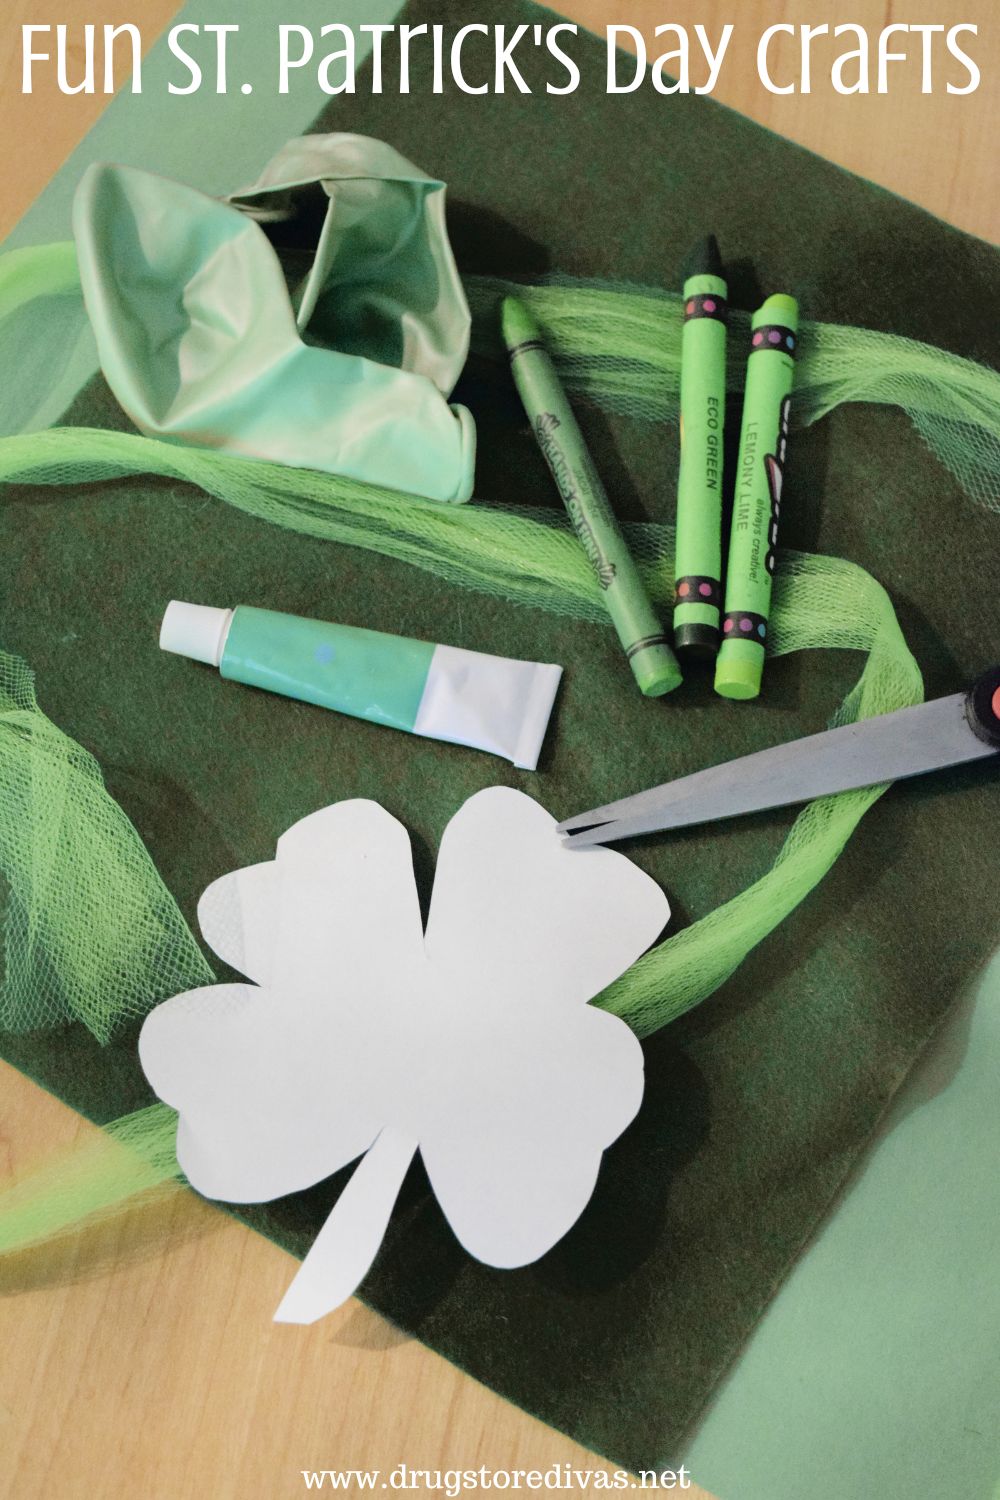 Green craft items, with a white shamrock cut out on top, with the words 